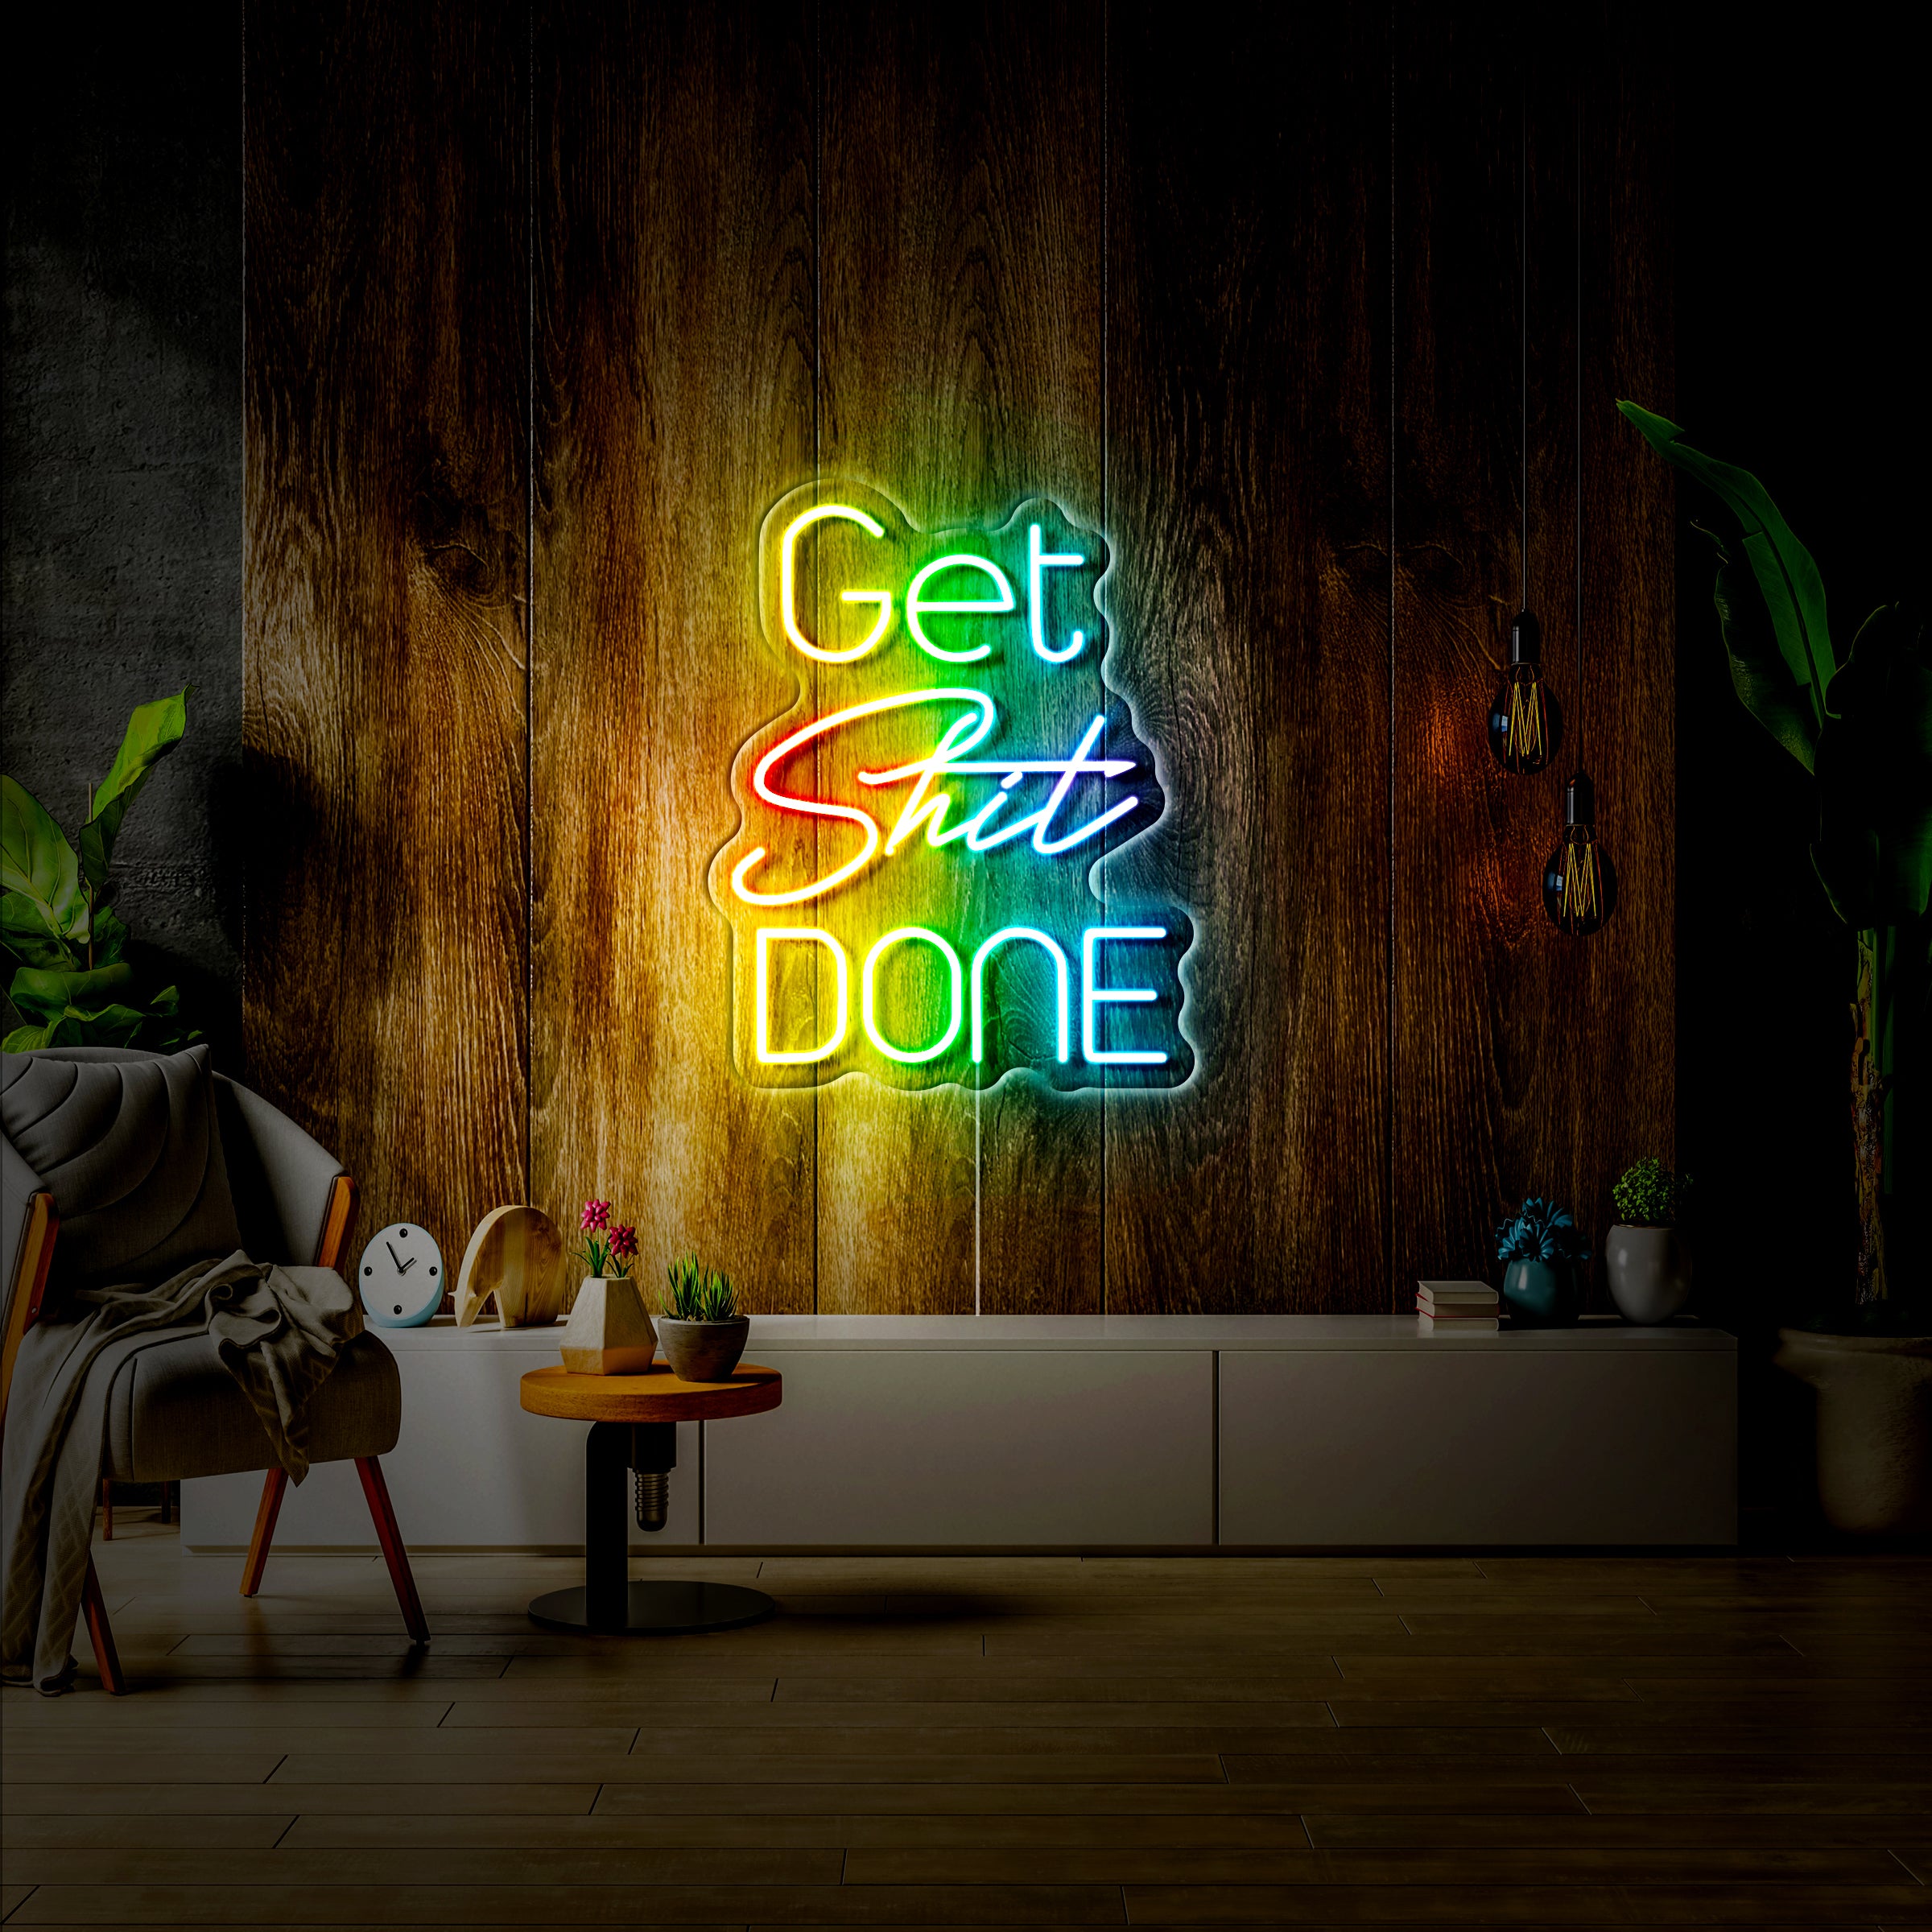 'Get Shit Done' LED Neon Sign